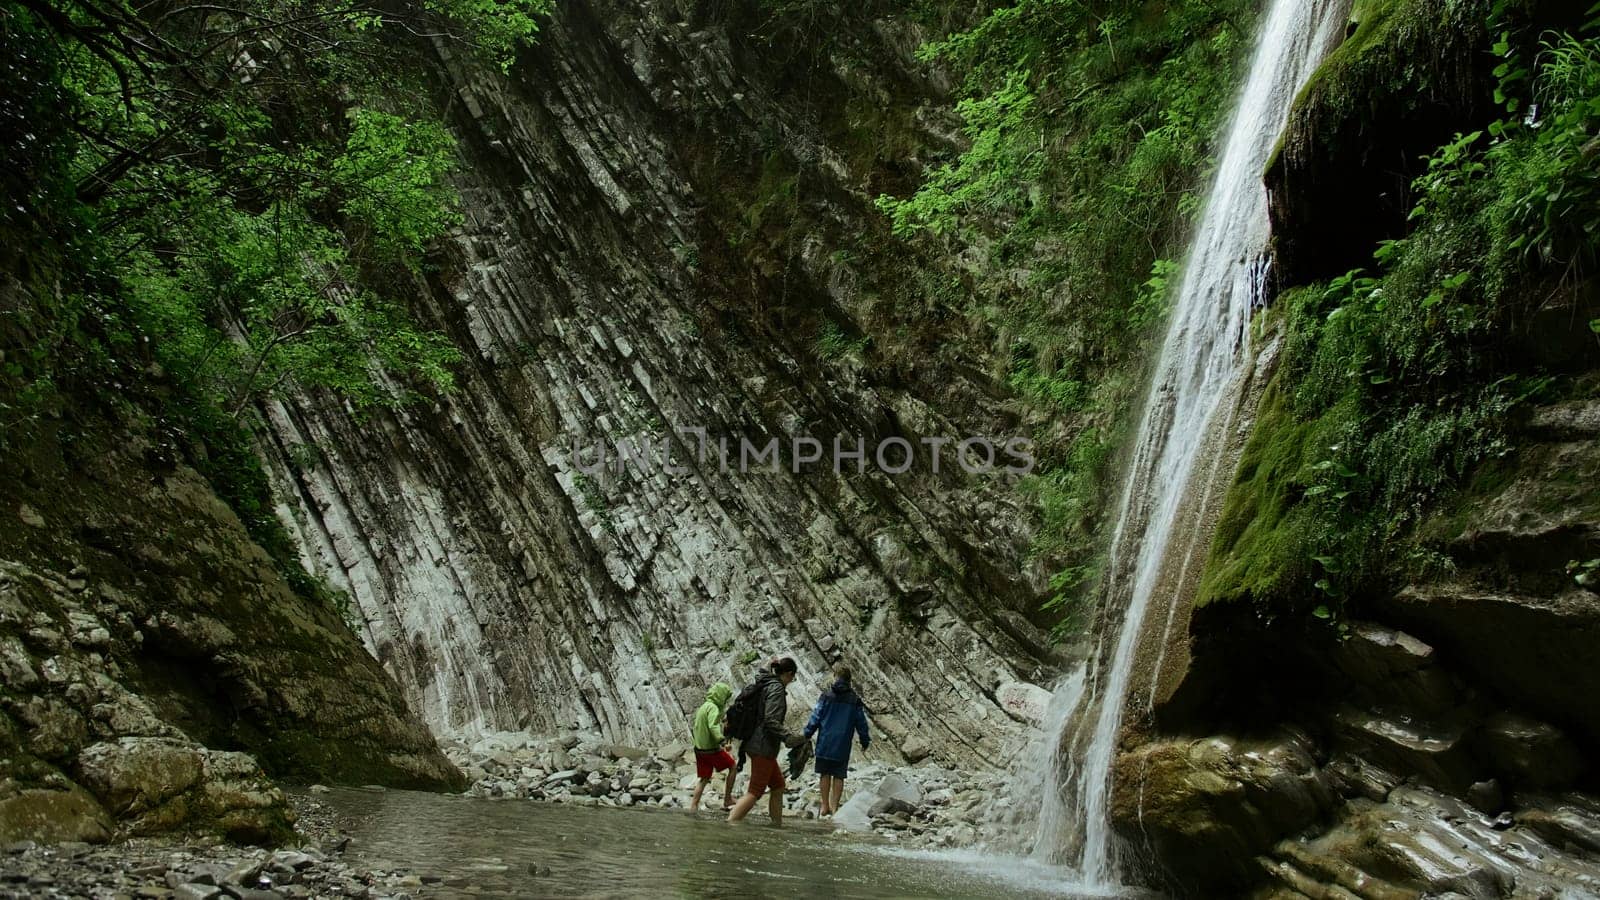 Jungle waterfall with walking in water. Creative. Concept of hiking, summer trip in wild nature